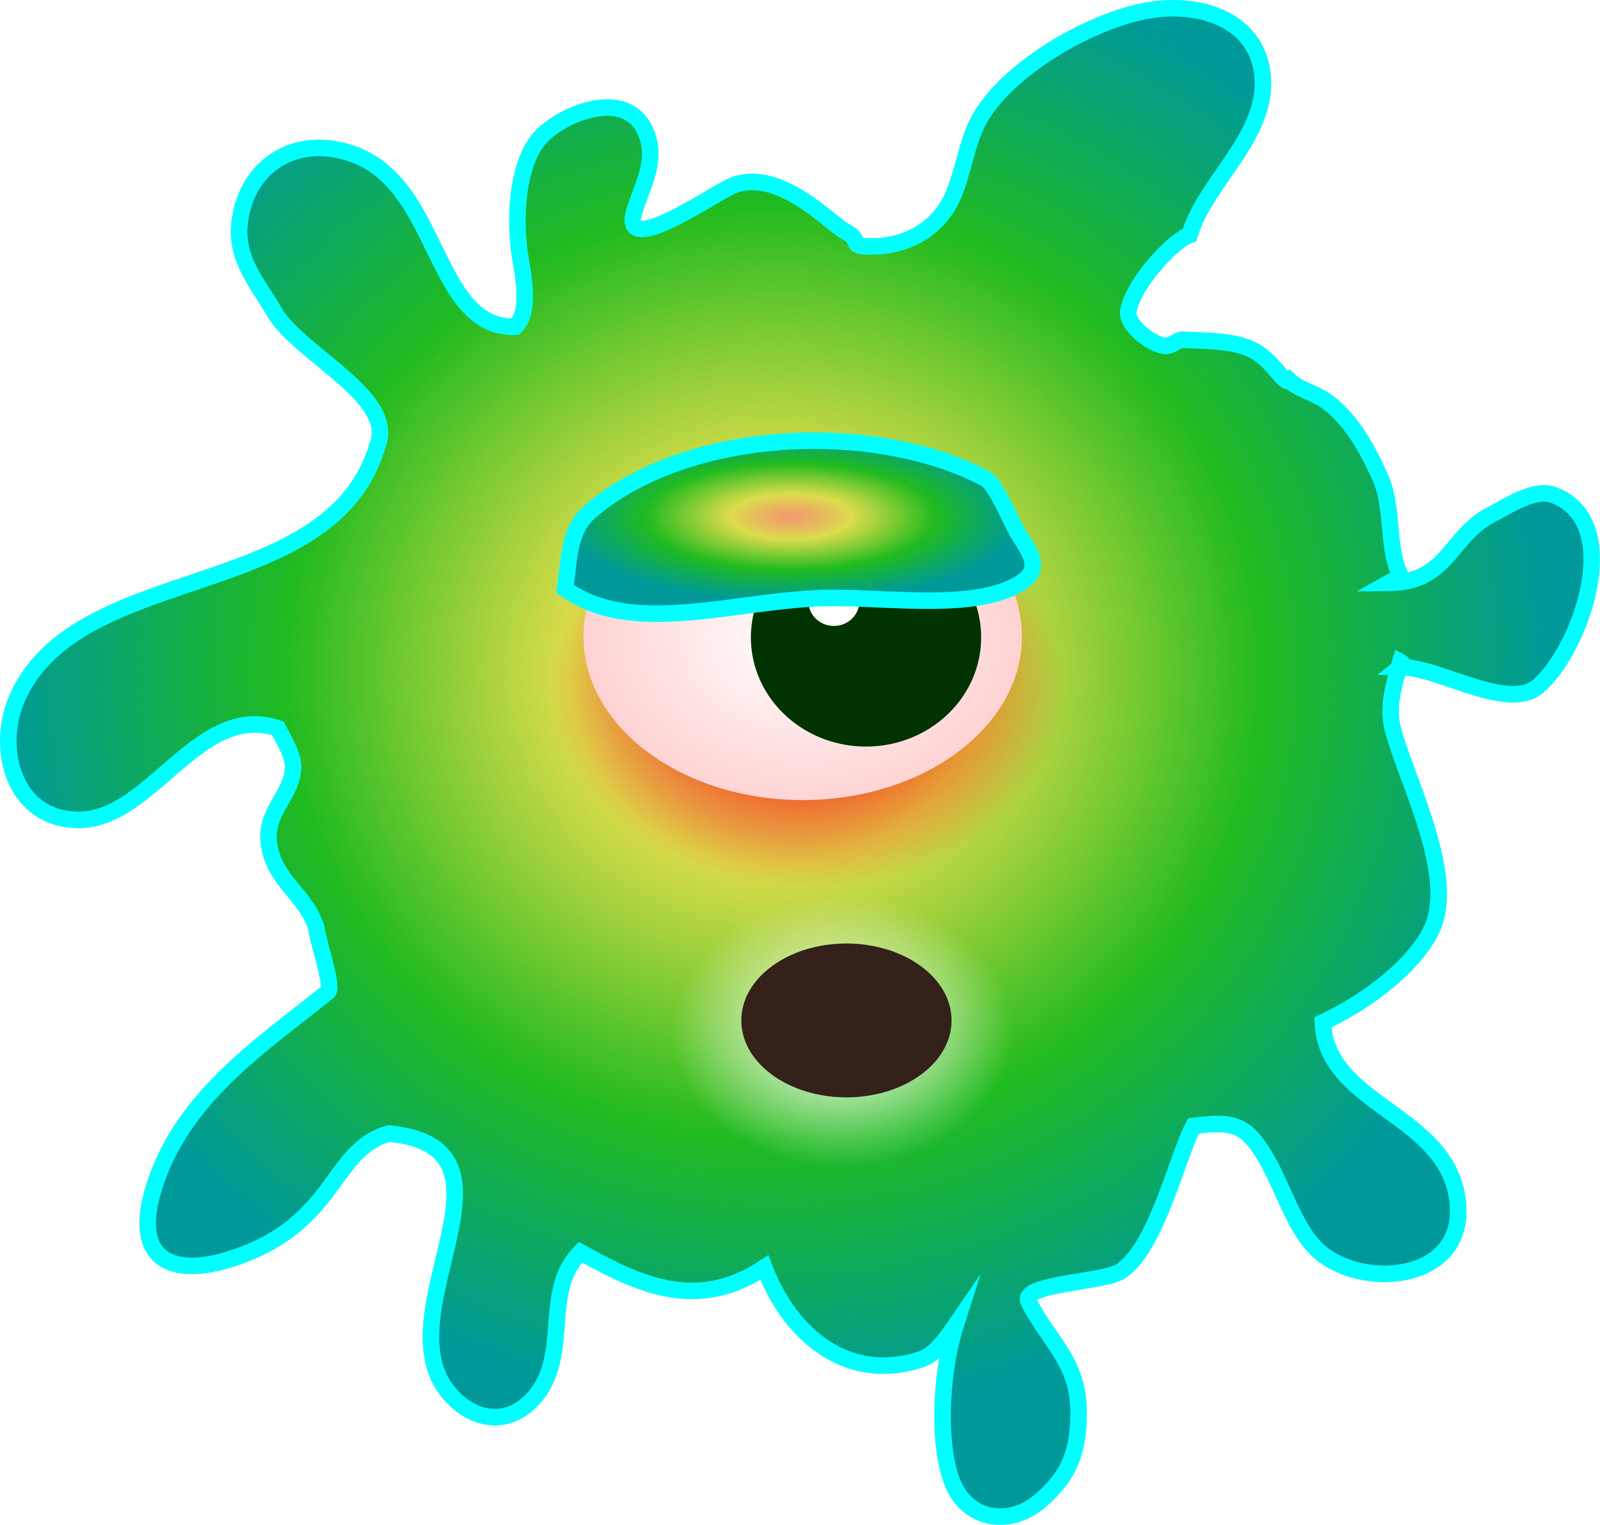 Bacteria clipart archaebacteria. Free stock photo germ